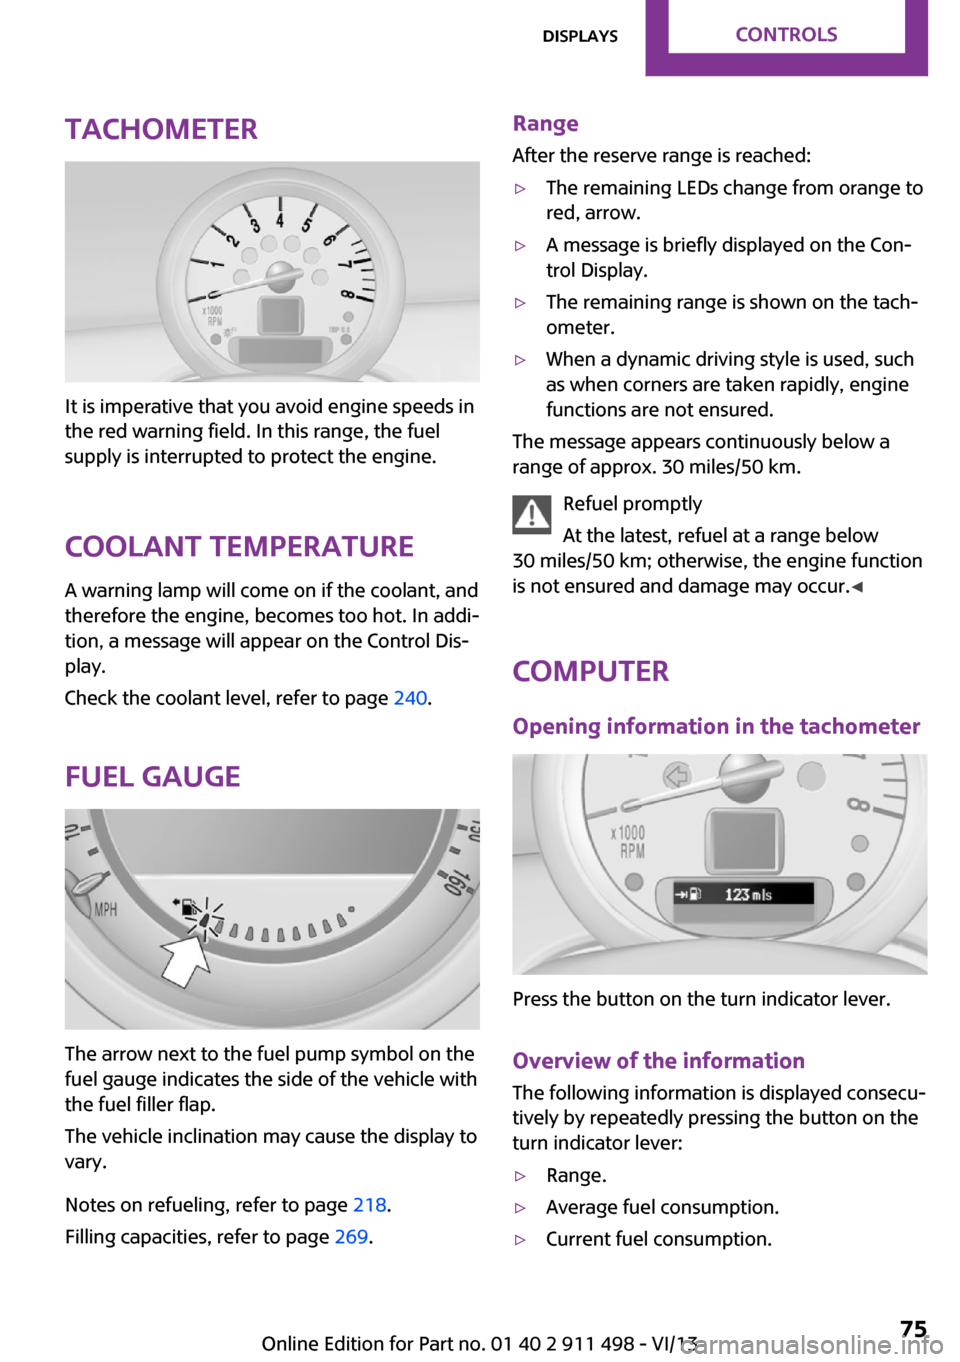 MINI Roadster 2014   (Mini Connected) Manual PDF Tachometer
It is imperative that you avoid engine speeds in
the red warning field. In this range, the fuel
supply is interrupted to protect the engine.
Coolant temperature A warning lamp will come on 